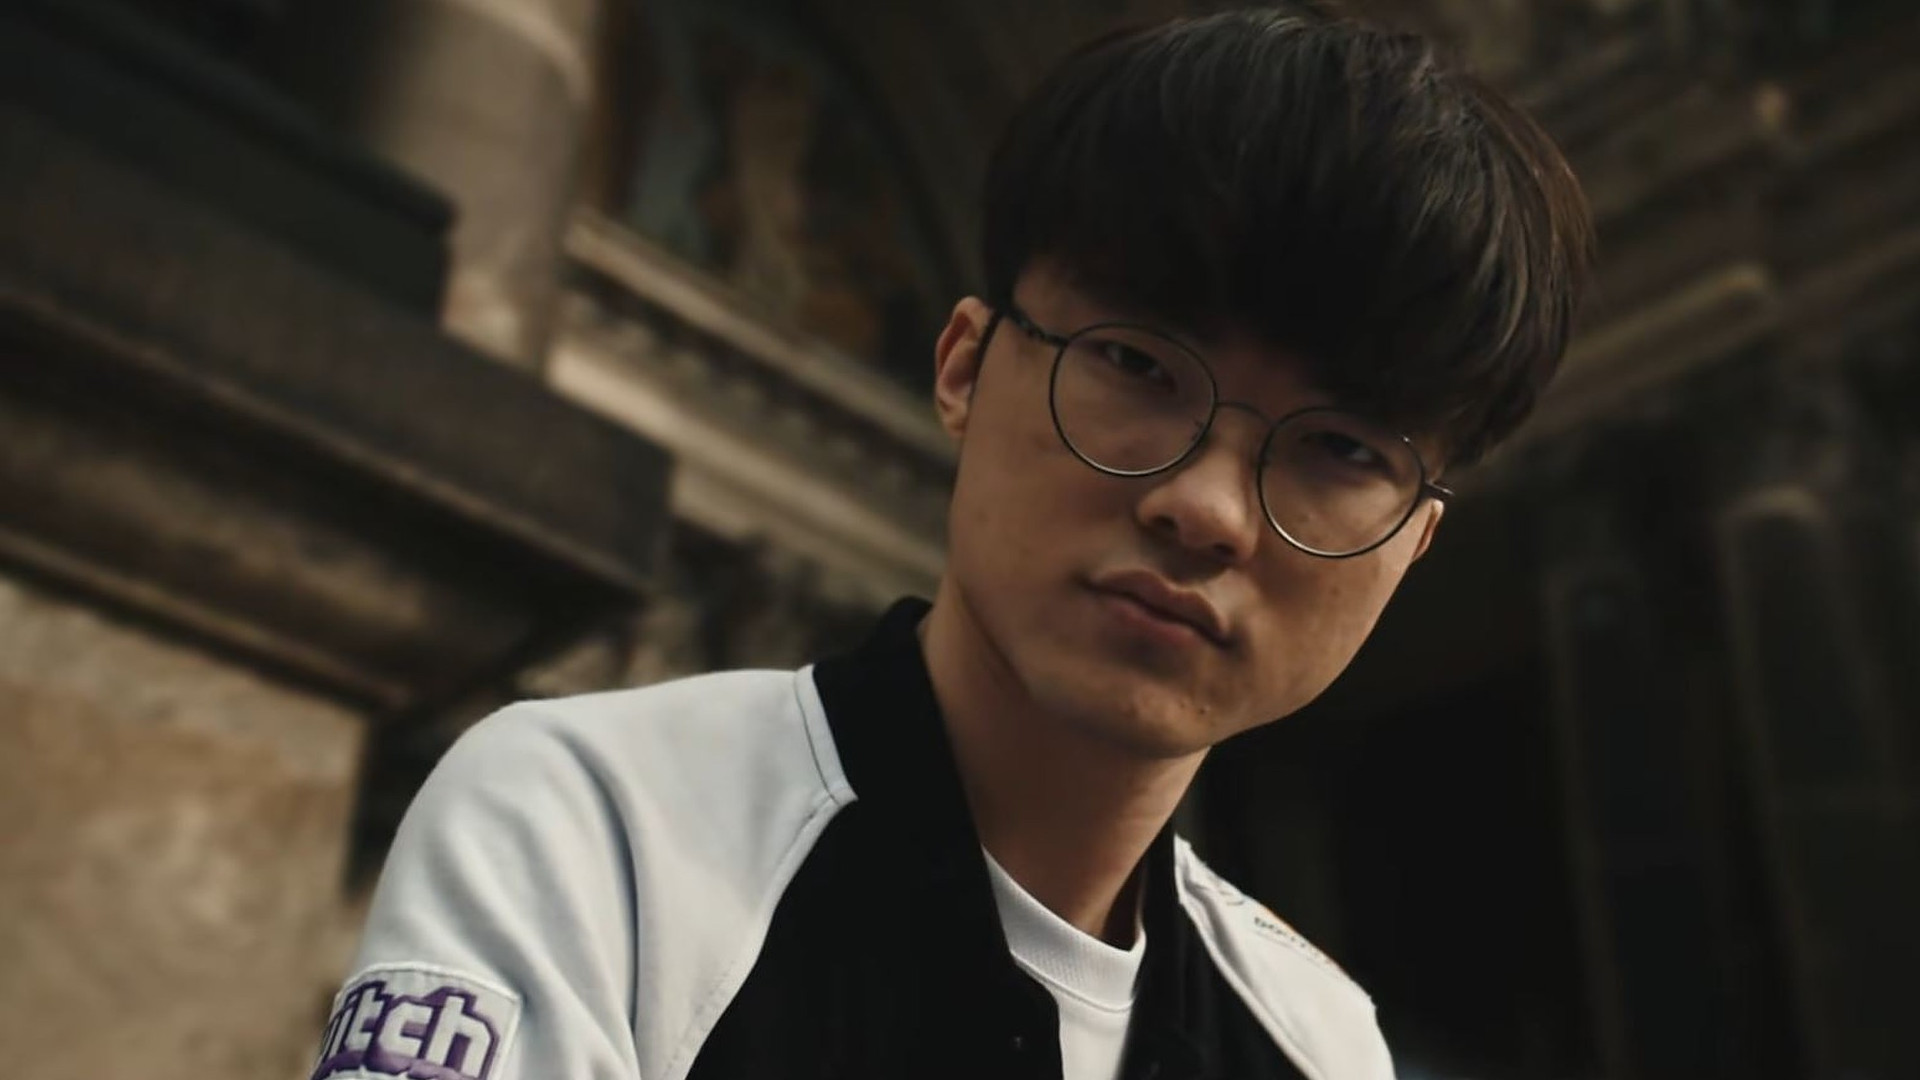 LoL: 100,000 watch 40 seconds on Twitch in which Faker (26) outsmarts the best players in China